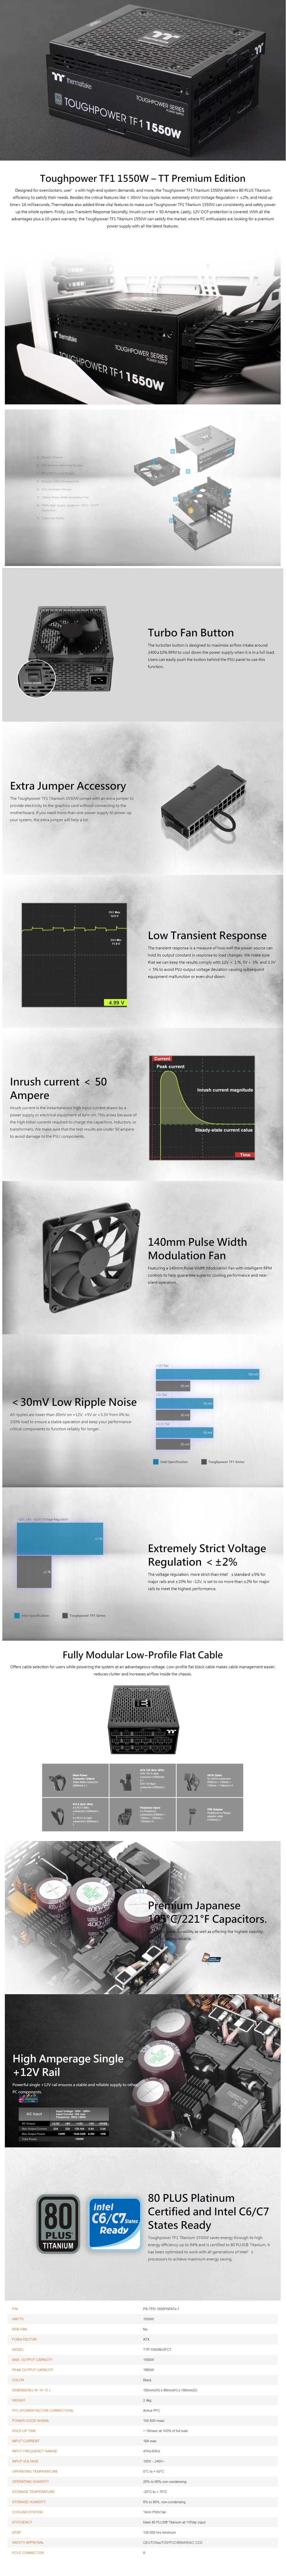 A large marketing image providing additional information about the product Thermaltake Toughpower TF1 1550W Titanium ATX Modular PSU - Additional alt info not provided